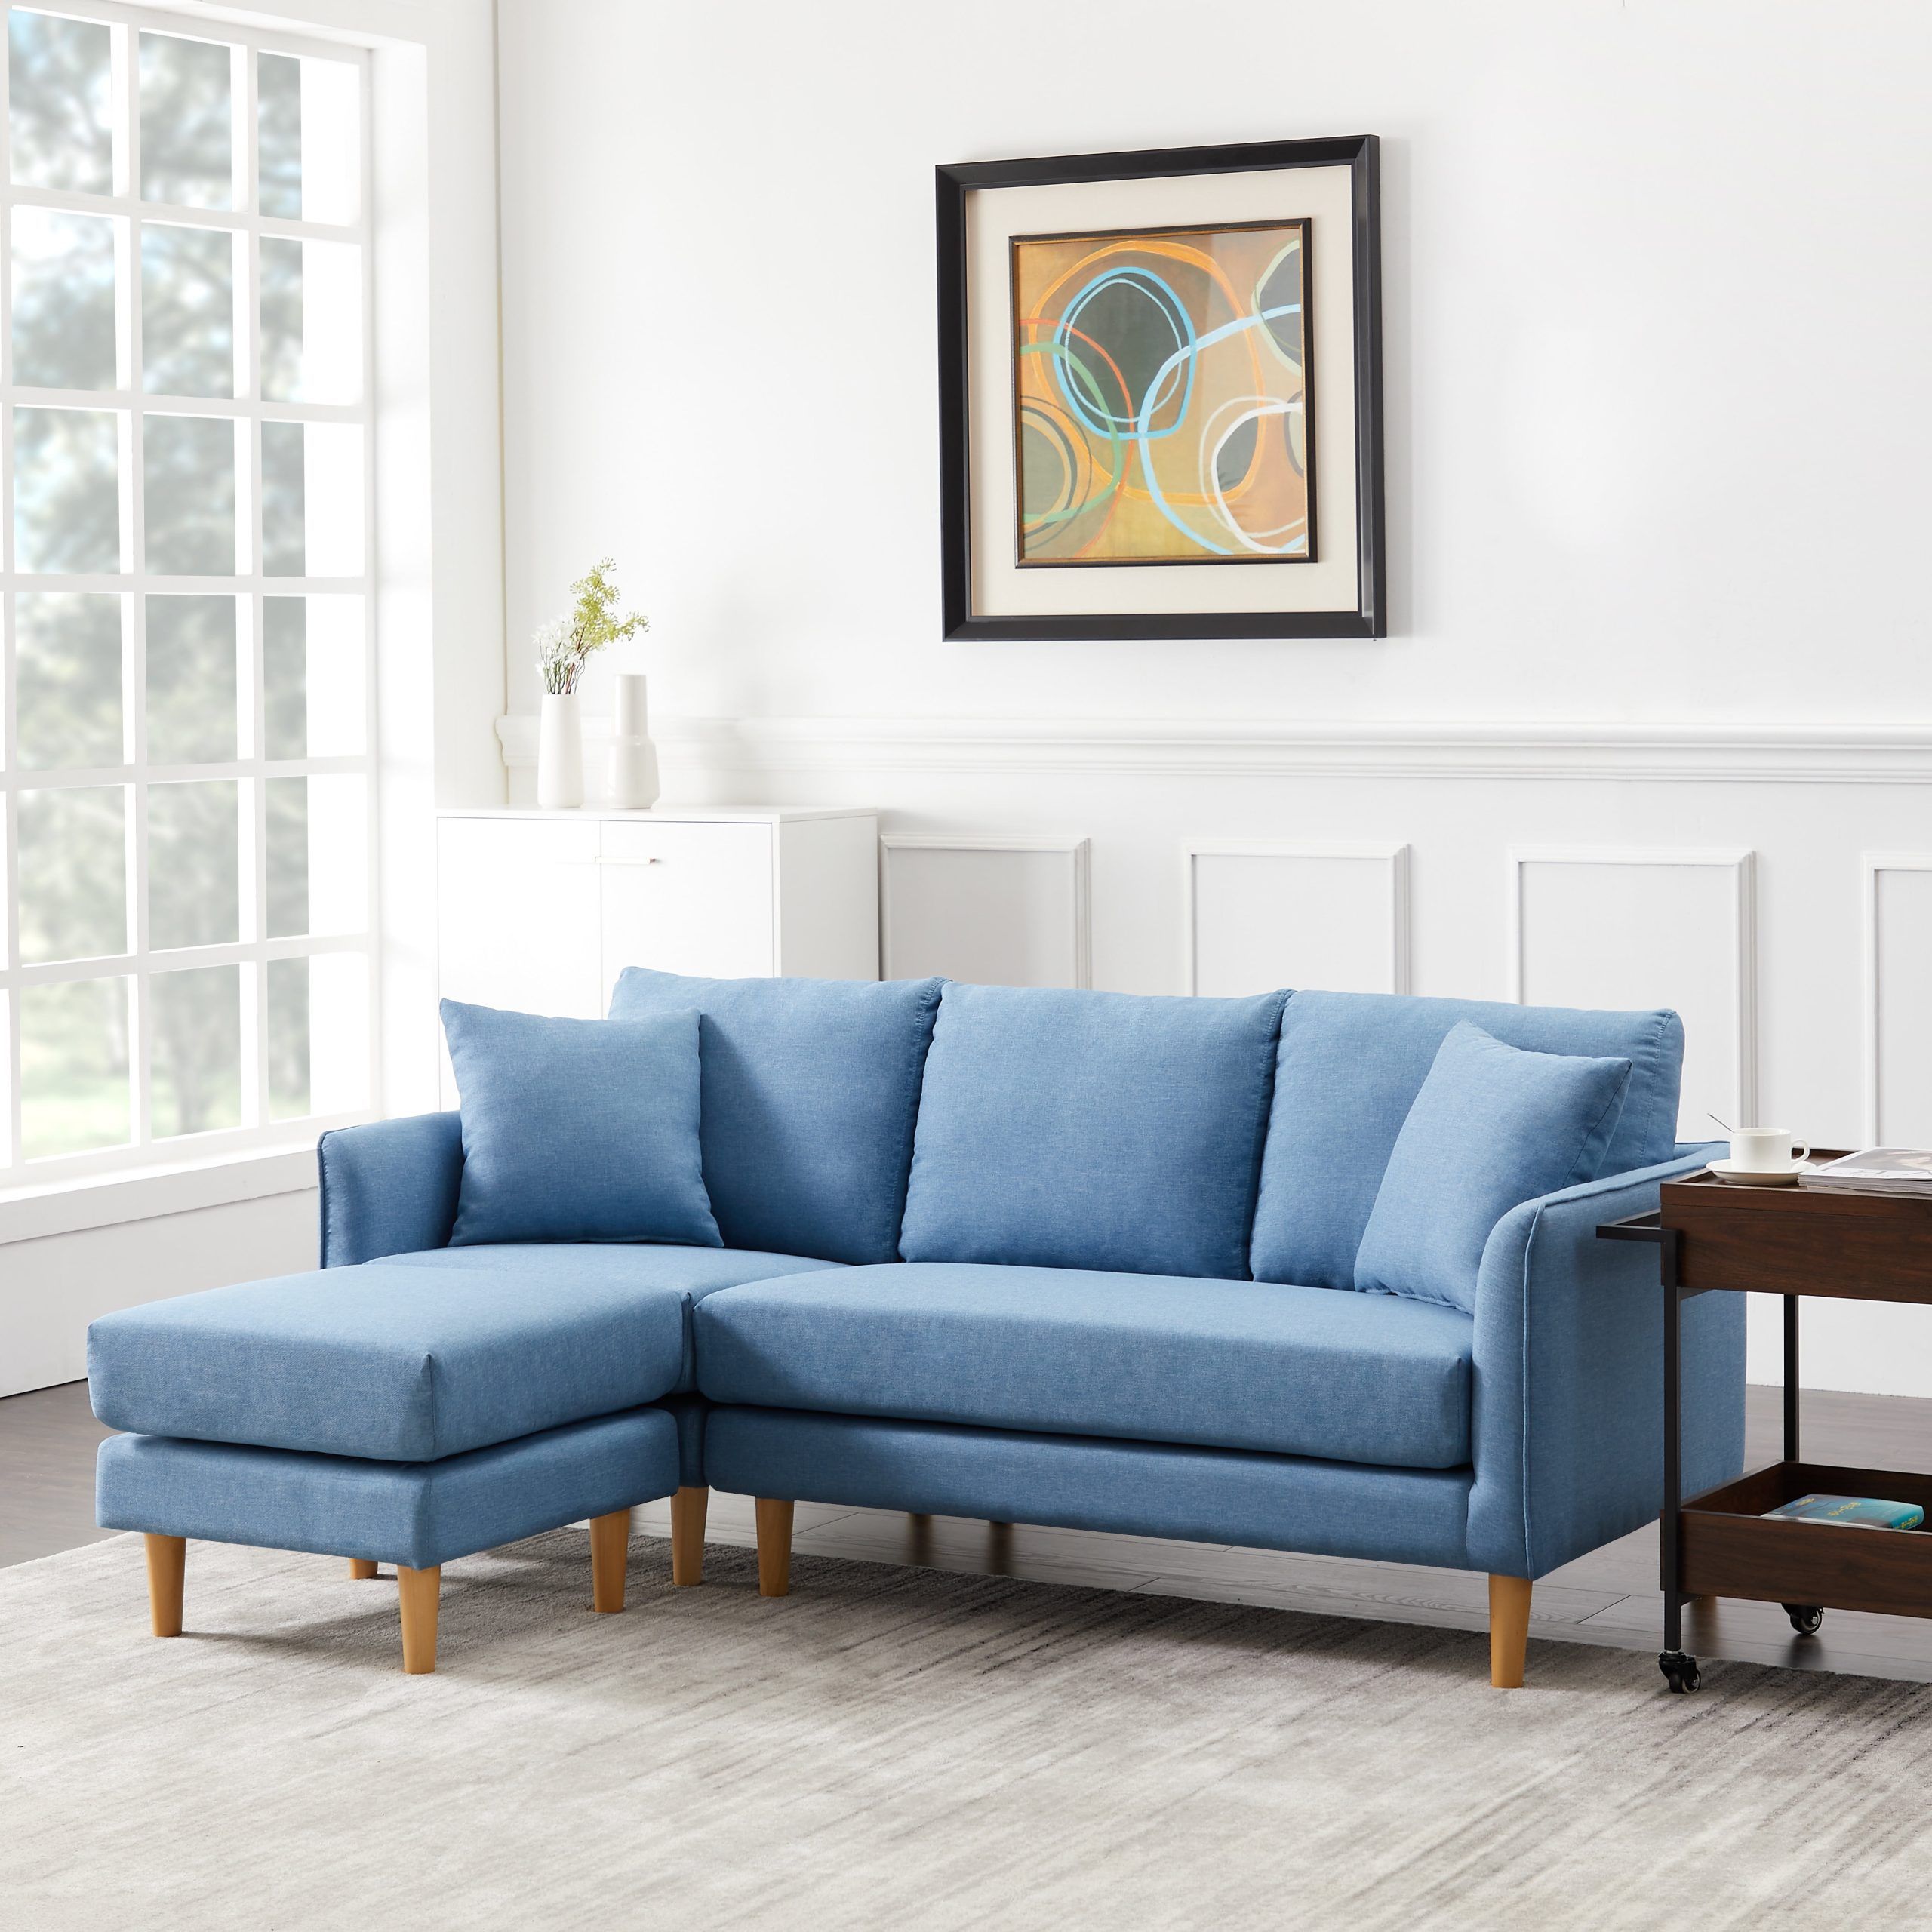 Uhomepro Convertible Sectional Sofa Couch, 74"w L Shaped Couch With Throughout Sofas For Compact Living (Gallery 11 of 20)